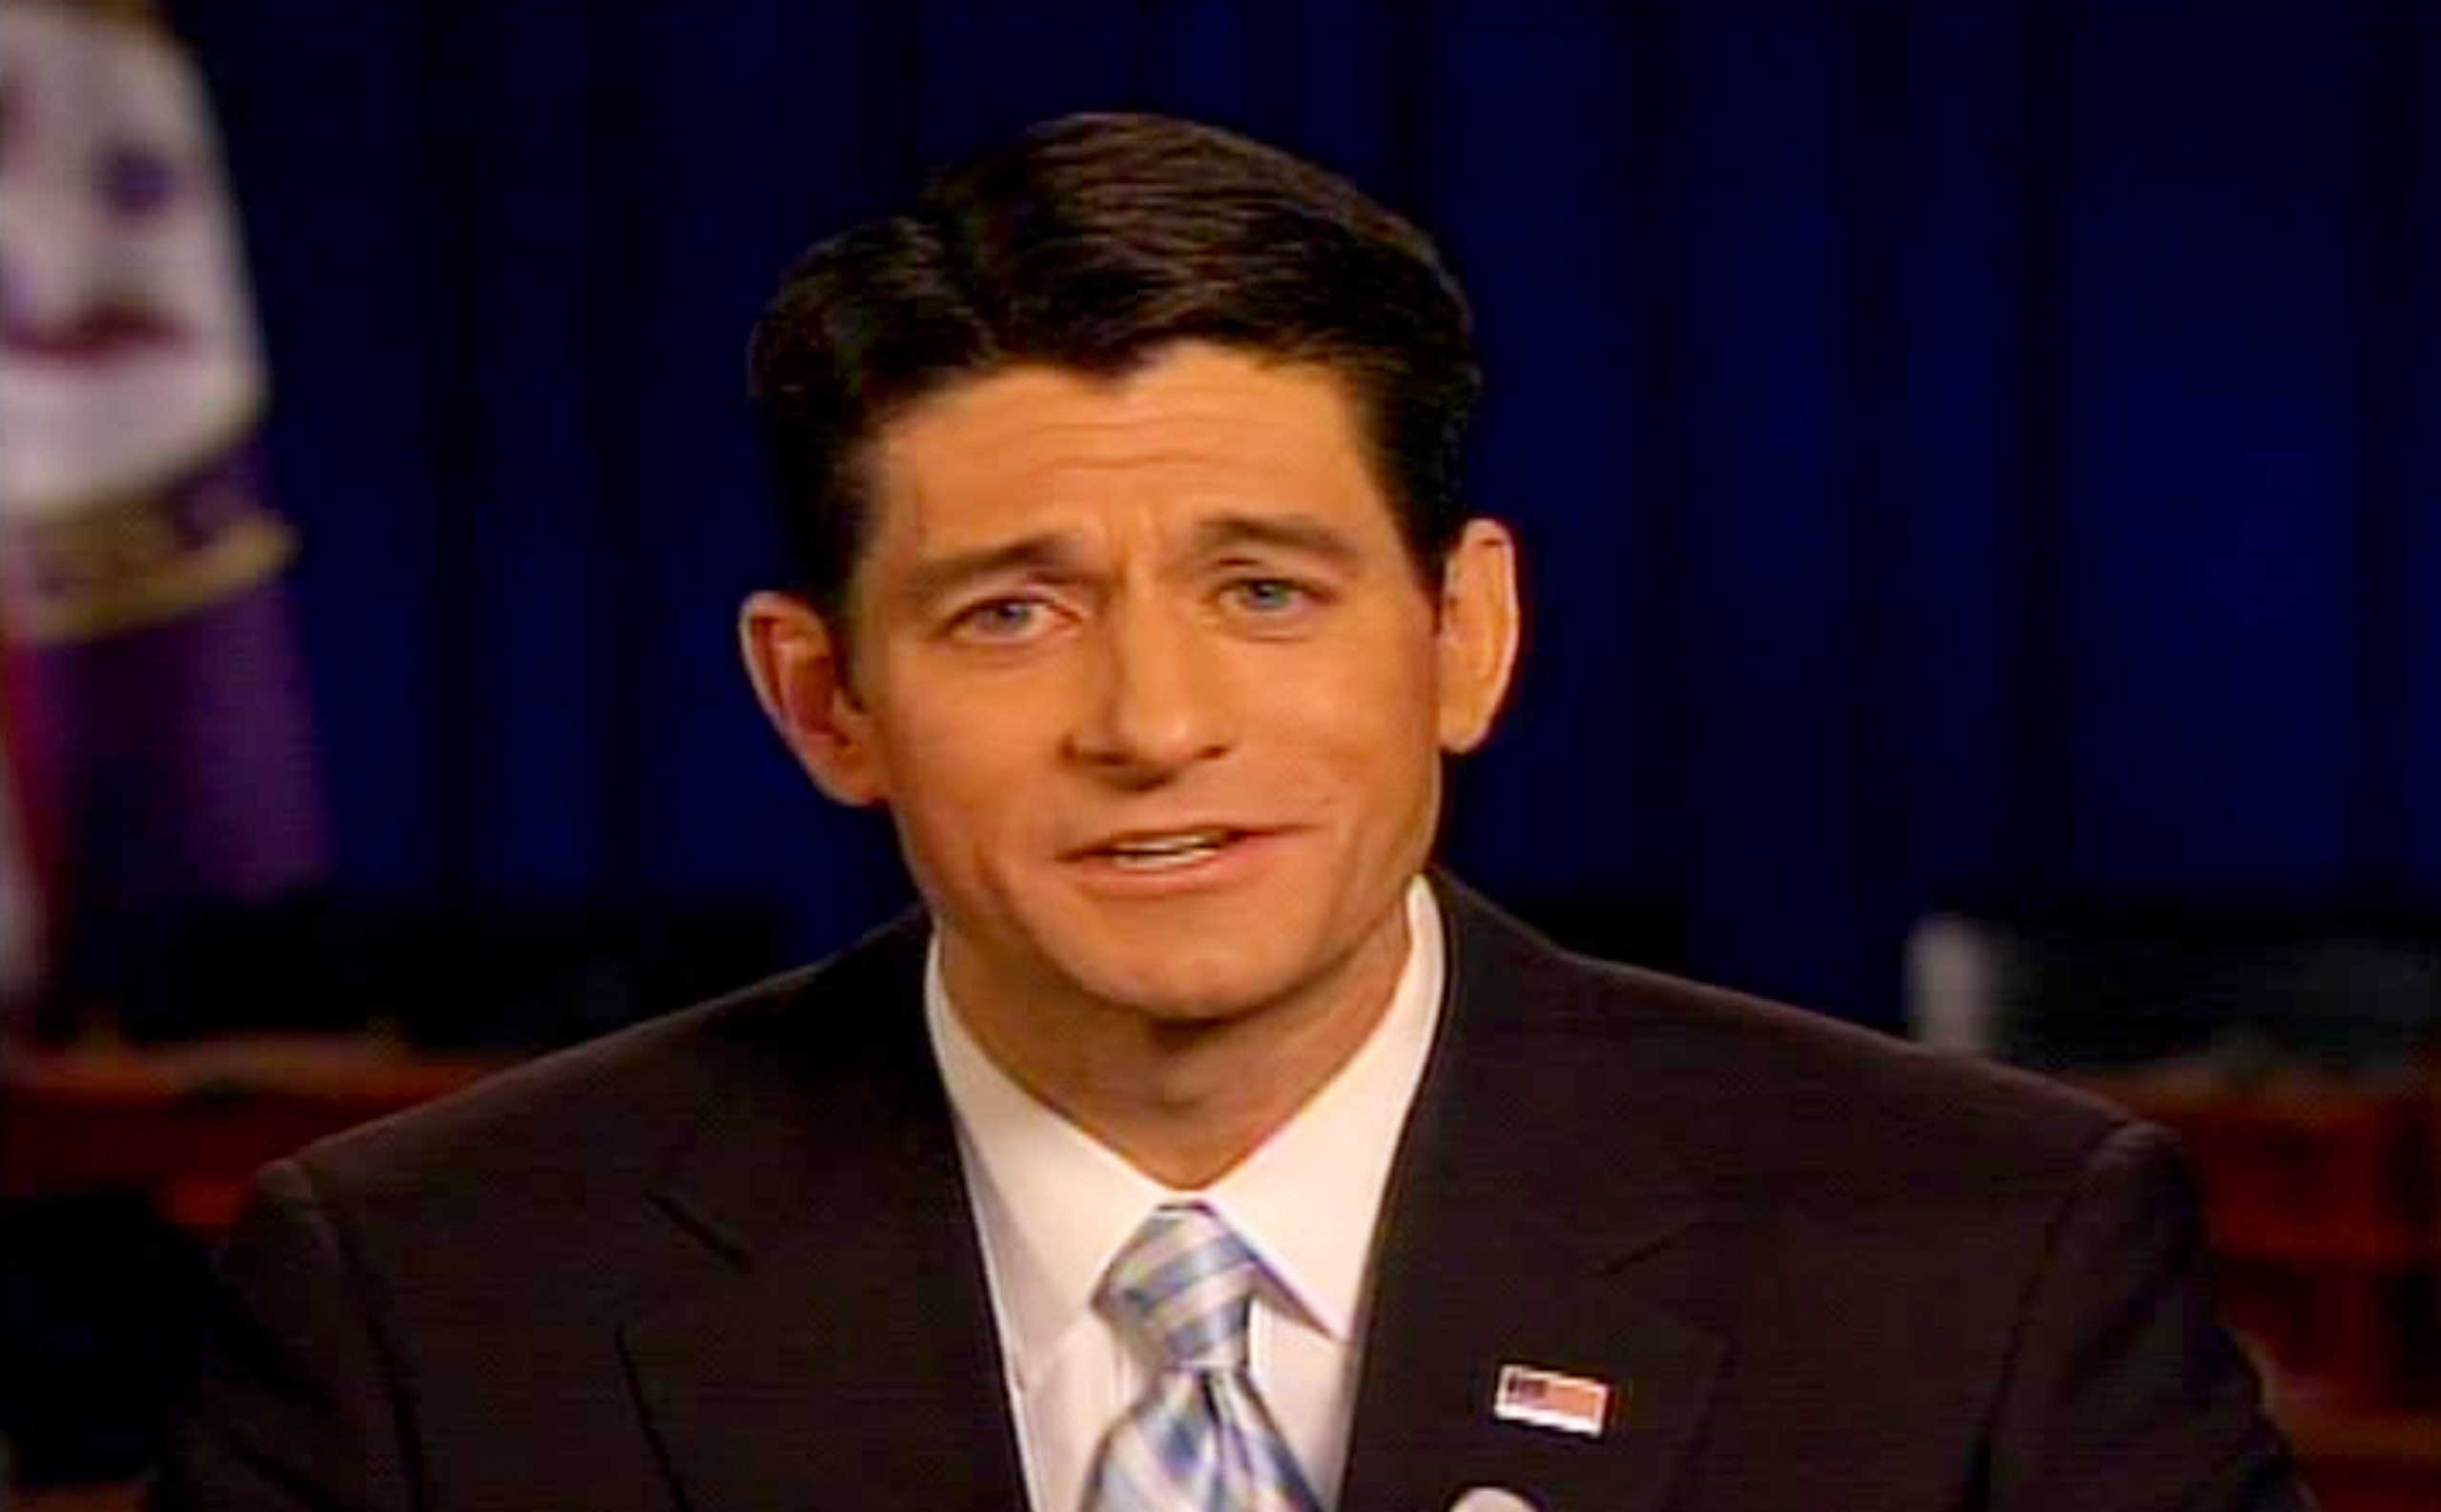 Rep. Paul Ryan gave the official response to Obama in 2011. The following year, he ran for vice president and lost.